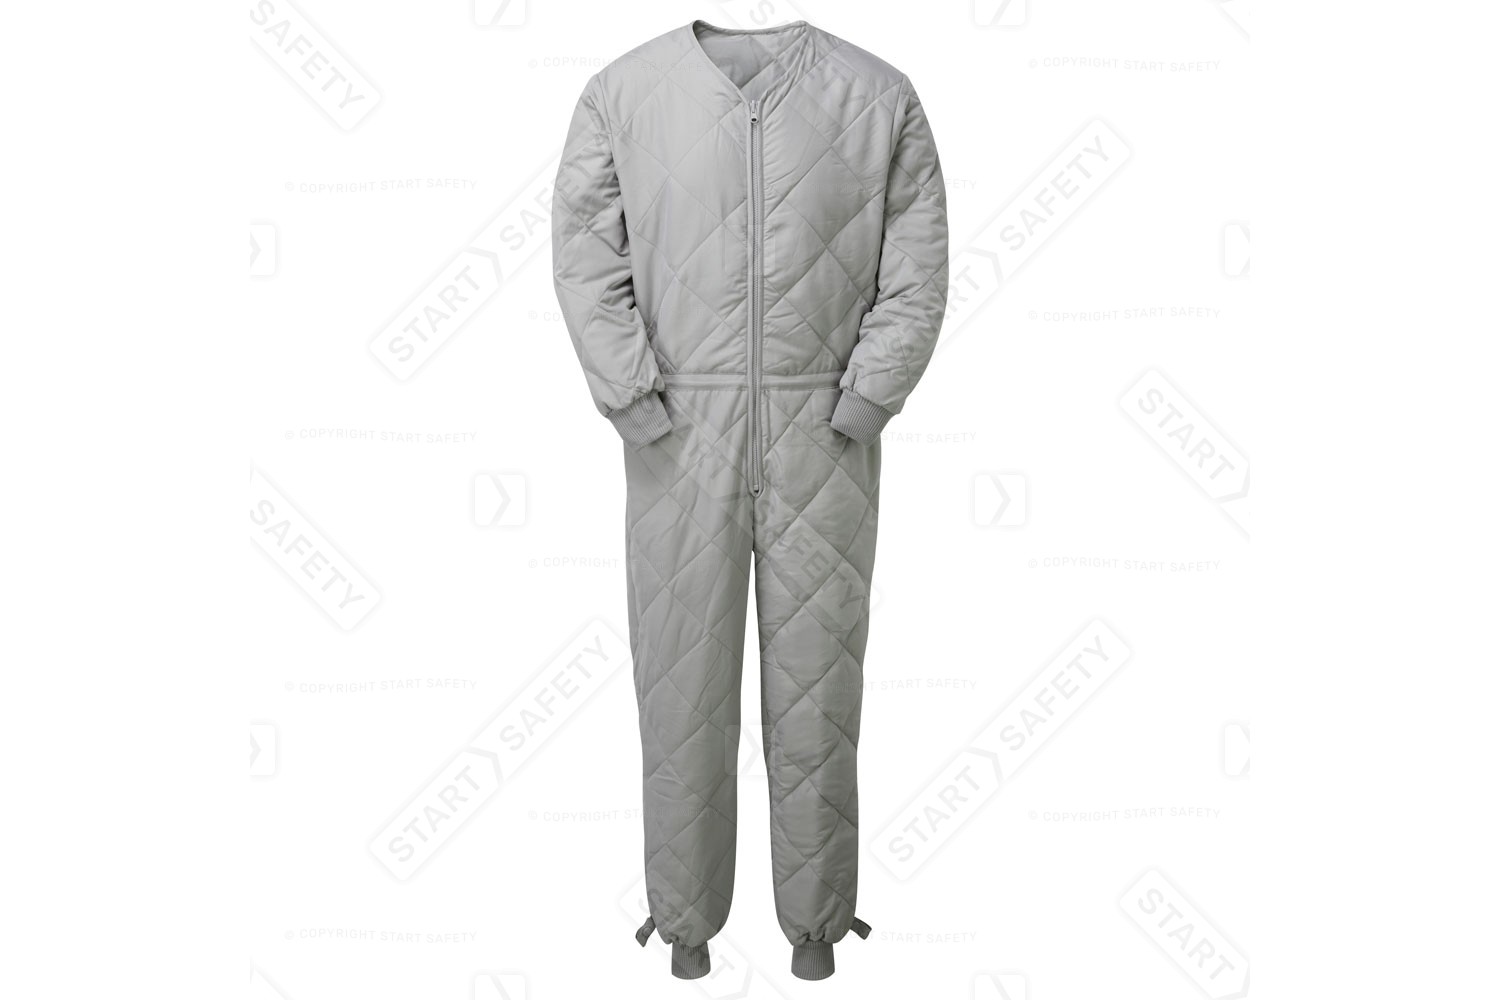 Additional Thermal Liner For Overalls